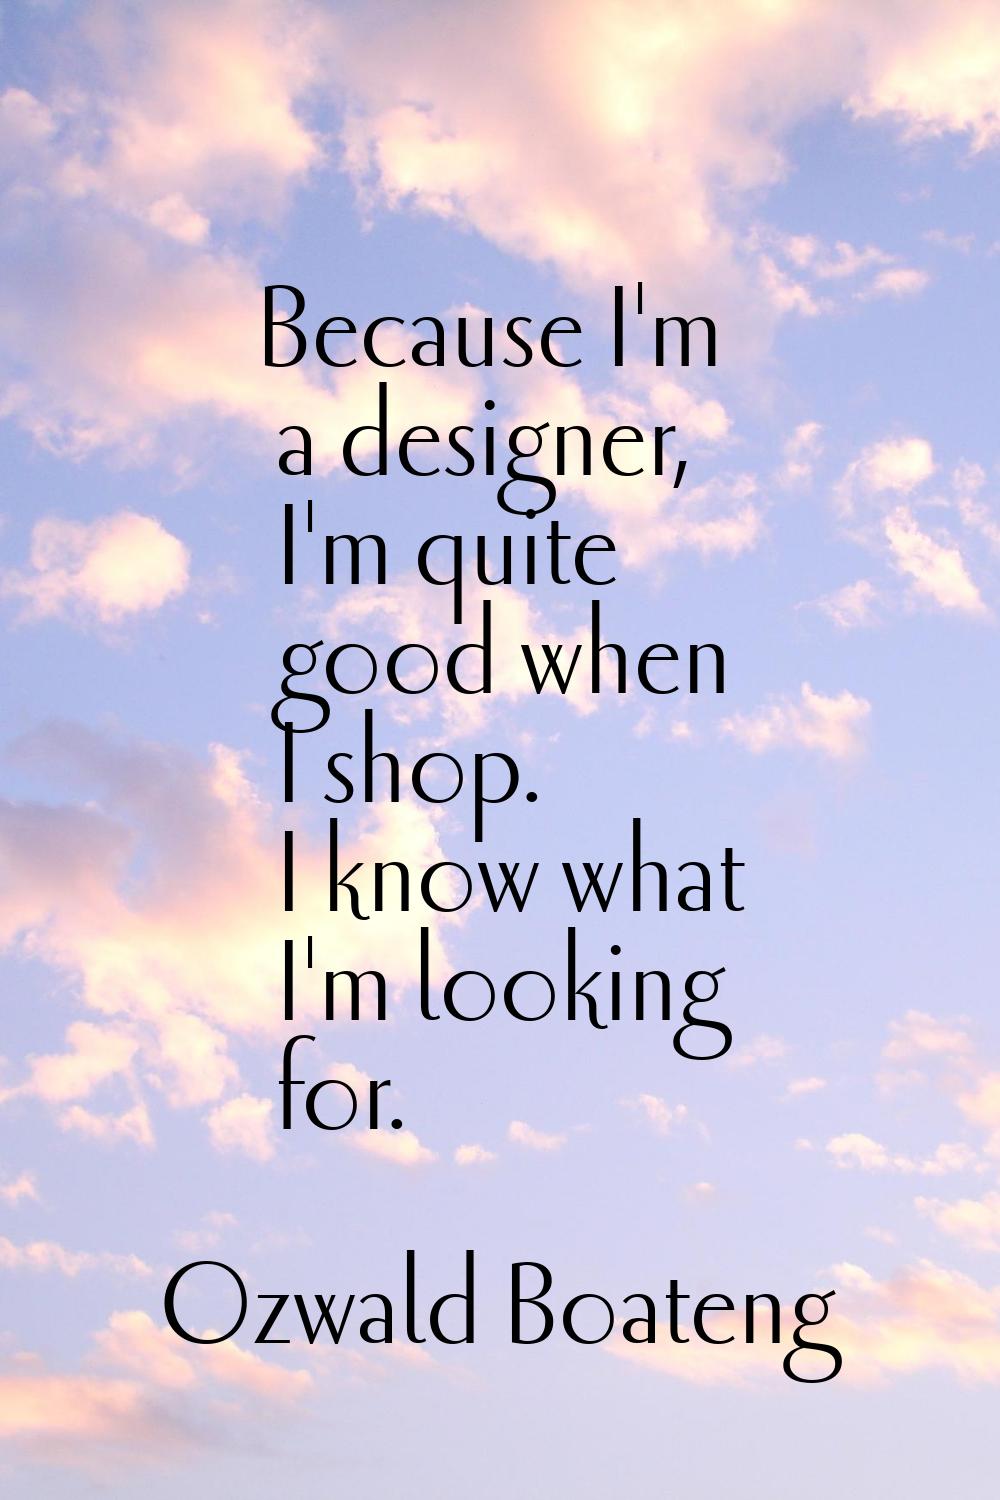 Because I'm a designer, I'm quite good when I shop. I know what I'm looking for.